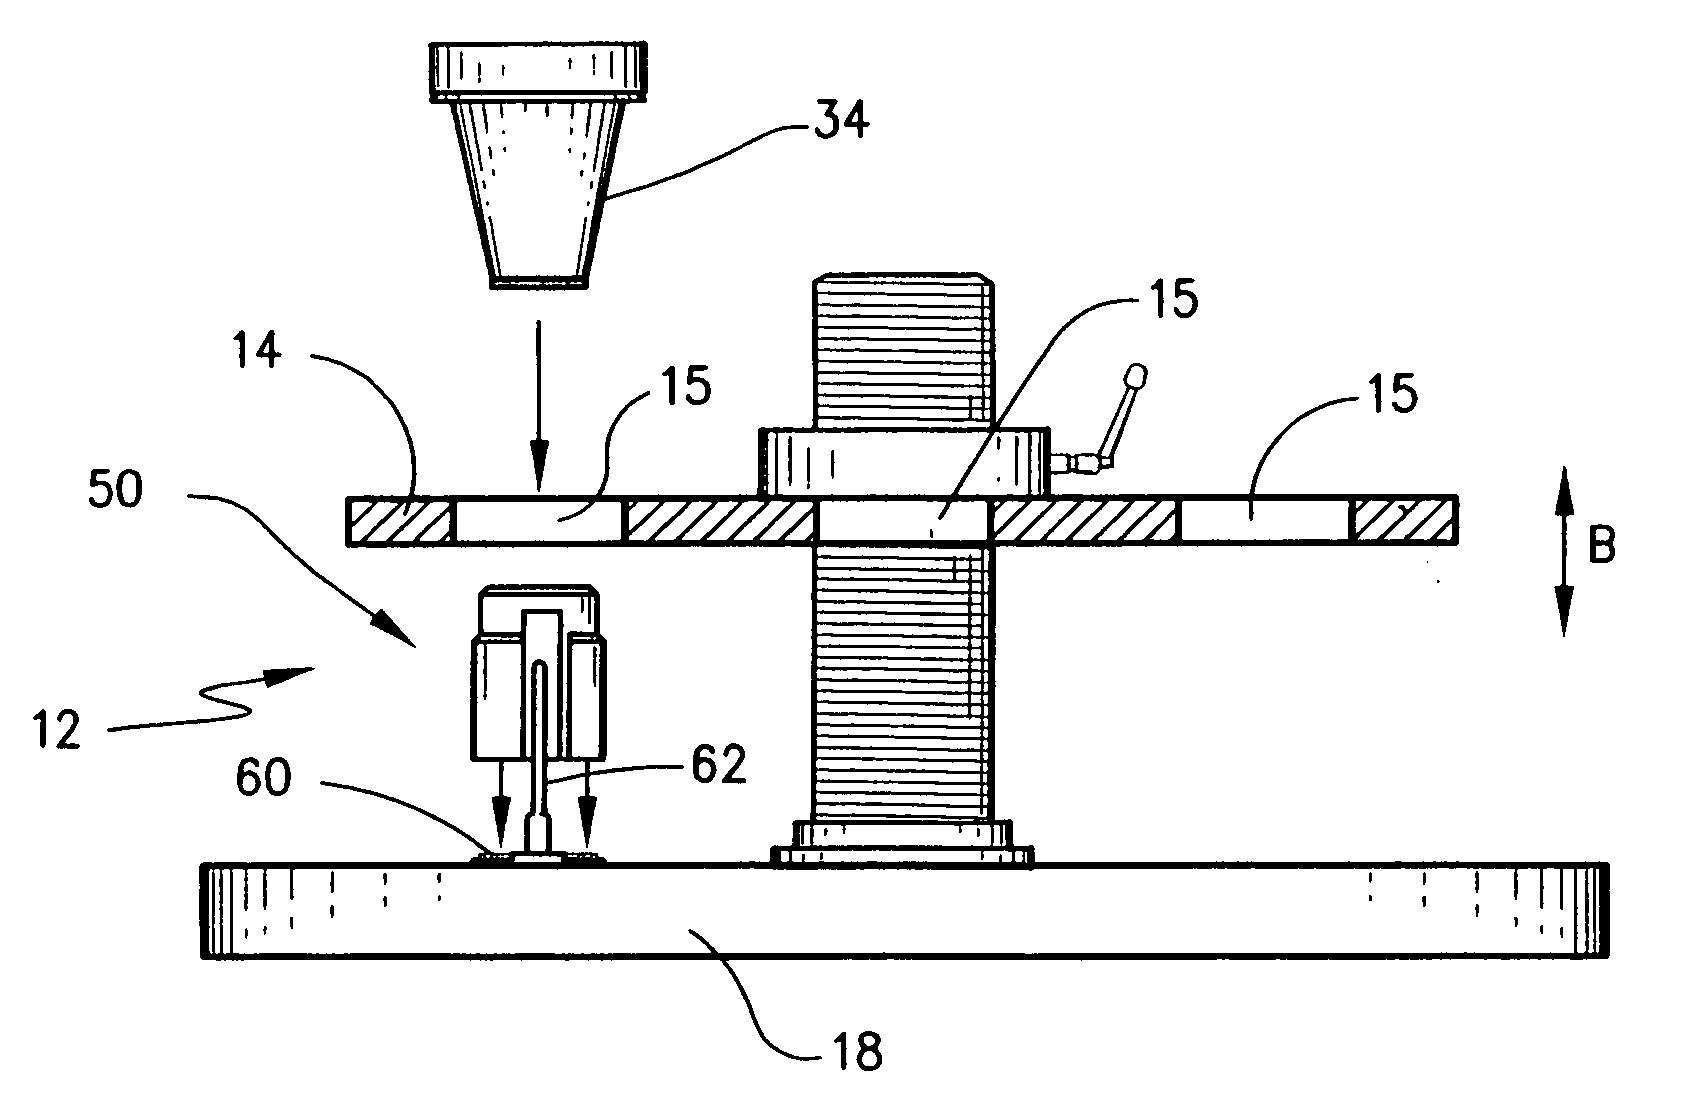 Hold down assembly, with tubular container transport apparatus and methodology incorporating the same